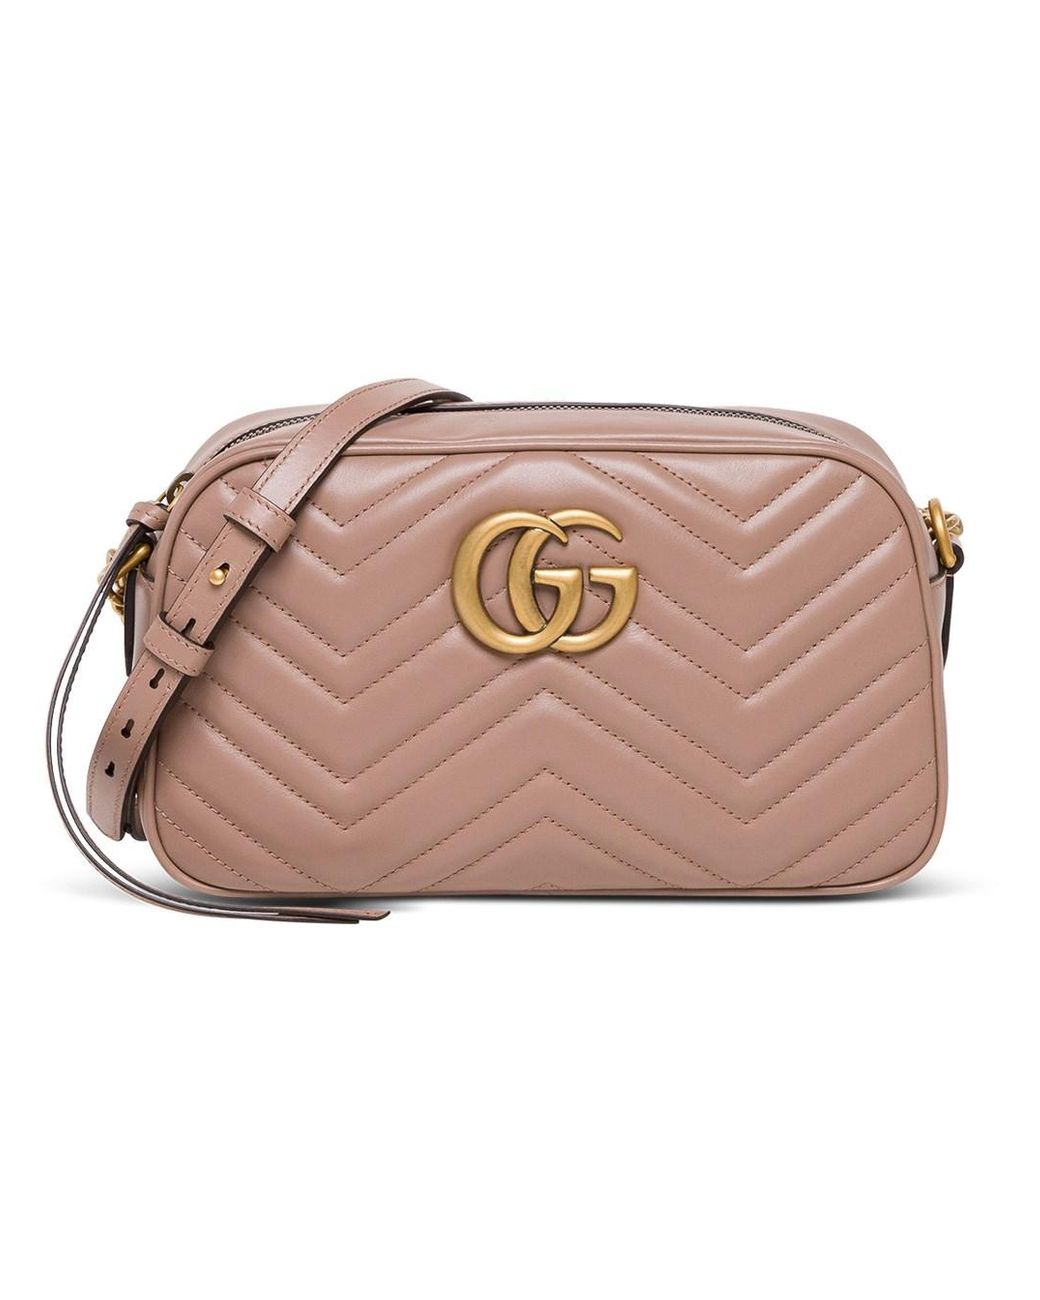 Gucci Woman's gg Marmont Powdler Pink Quilted Leather